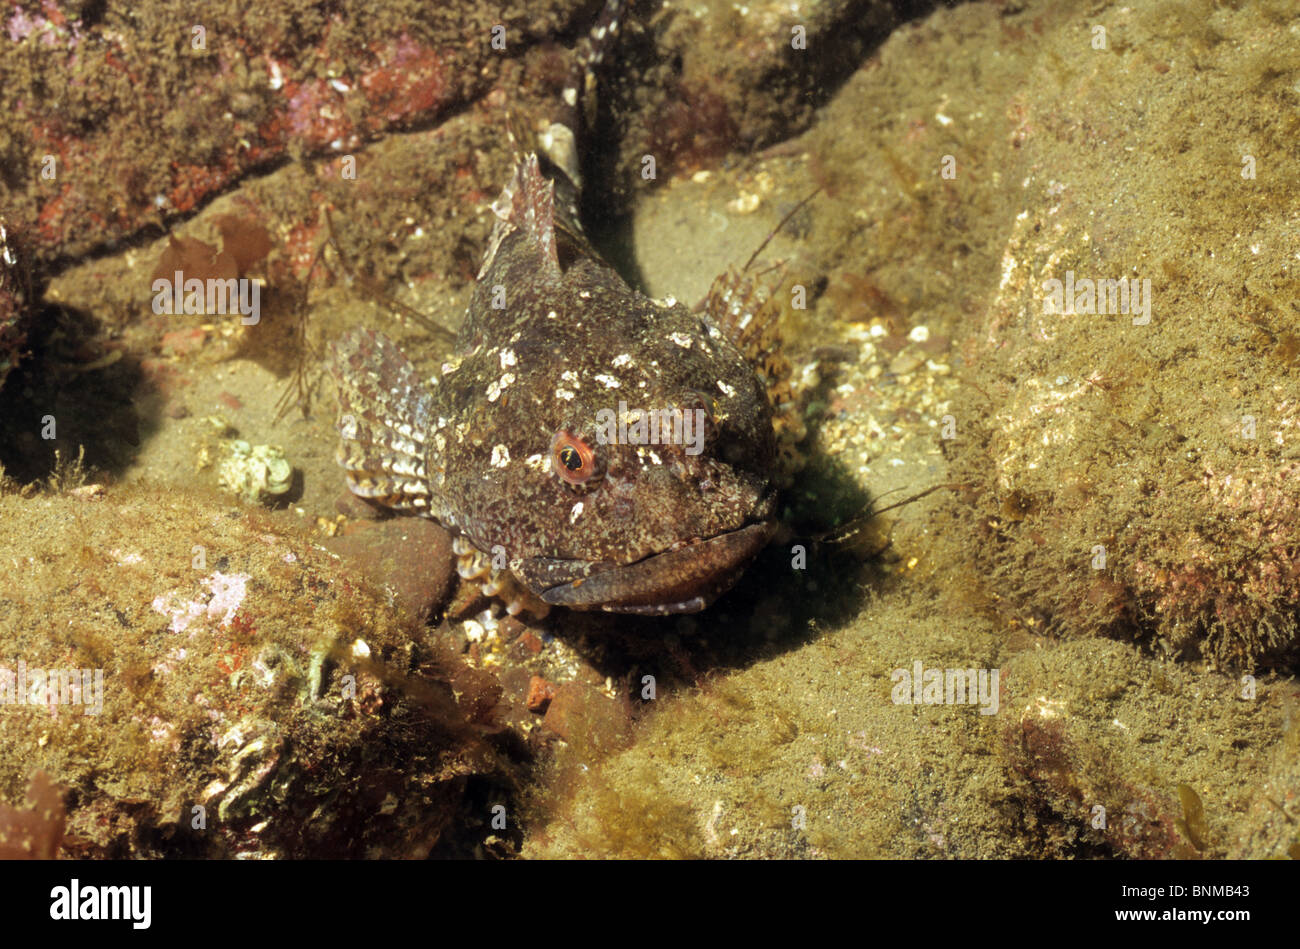 Short - Spined Sea Scorpion or Bull Rout, underwater off St Abbs. Scotland. Scuba diving. Underwater photography. Stock Photo